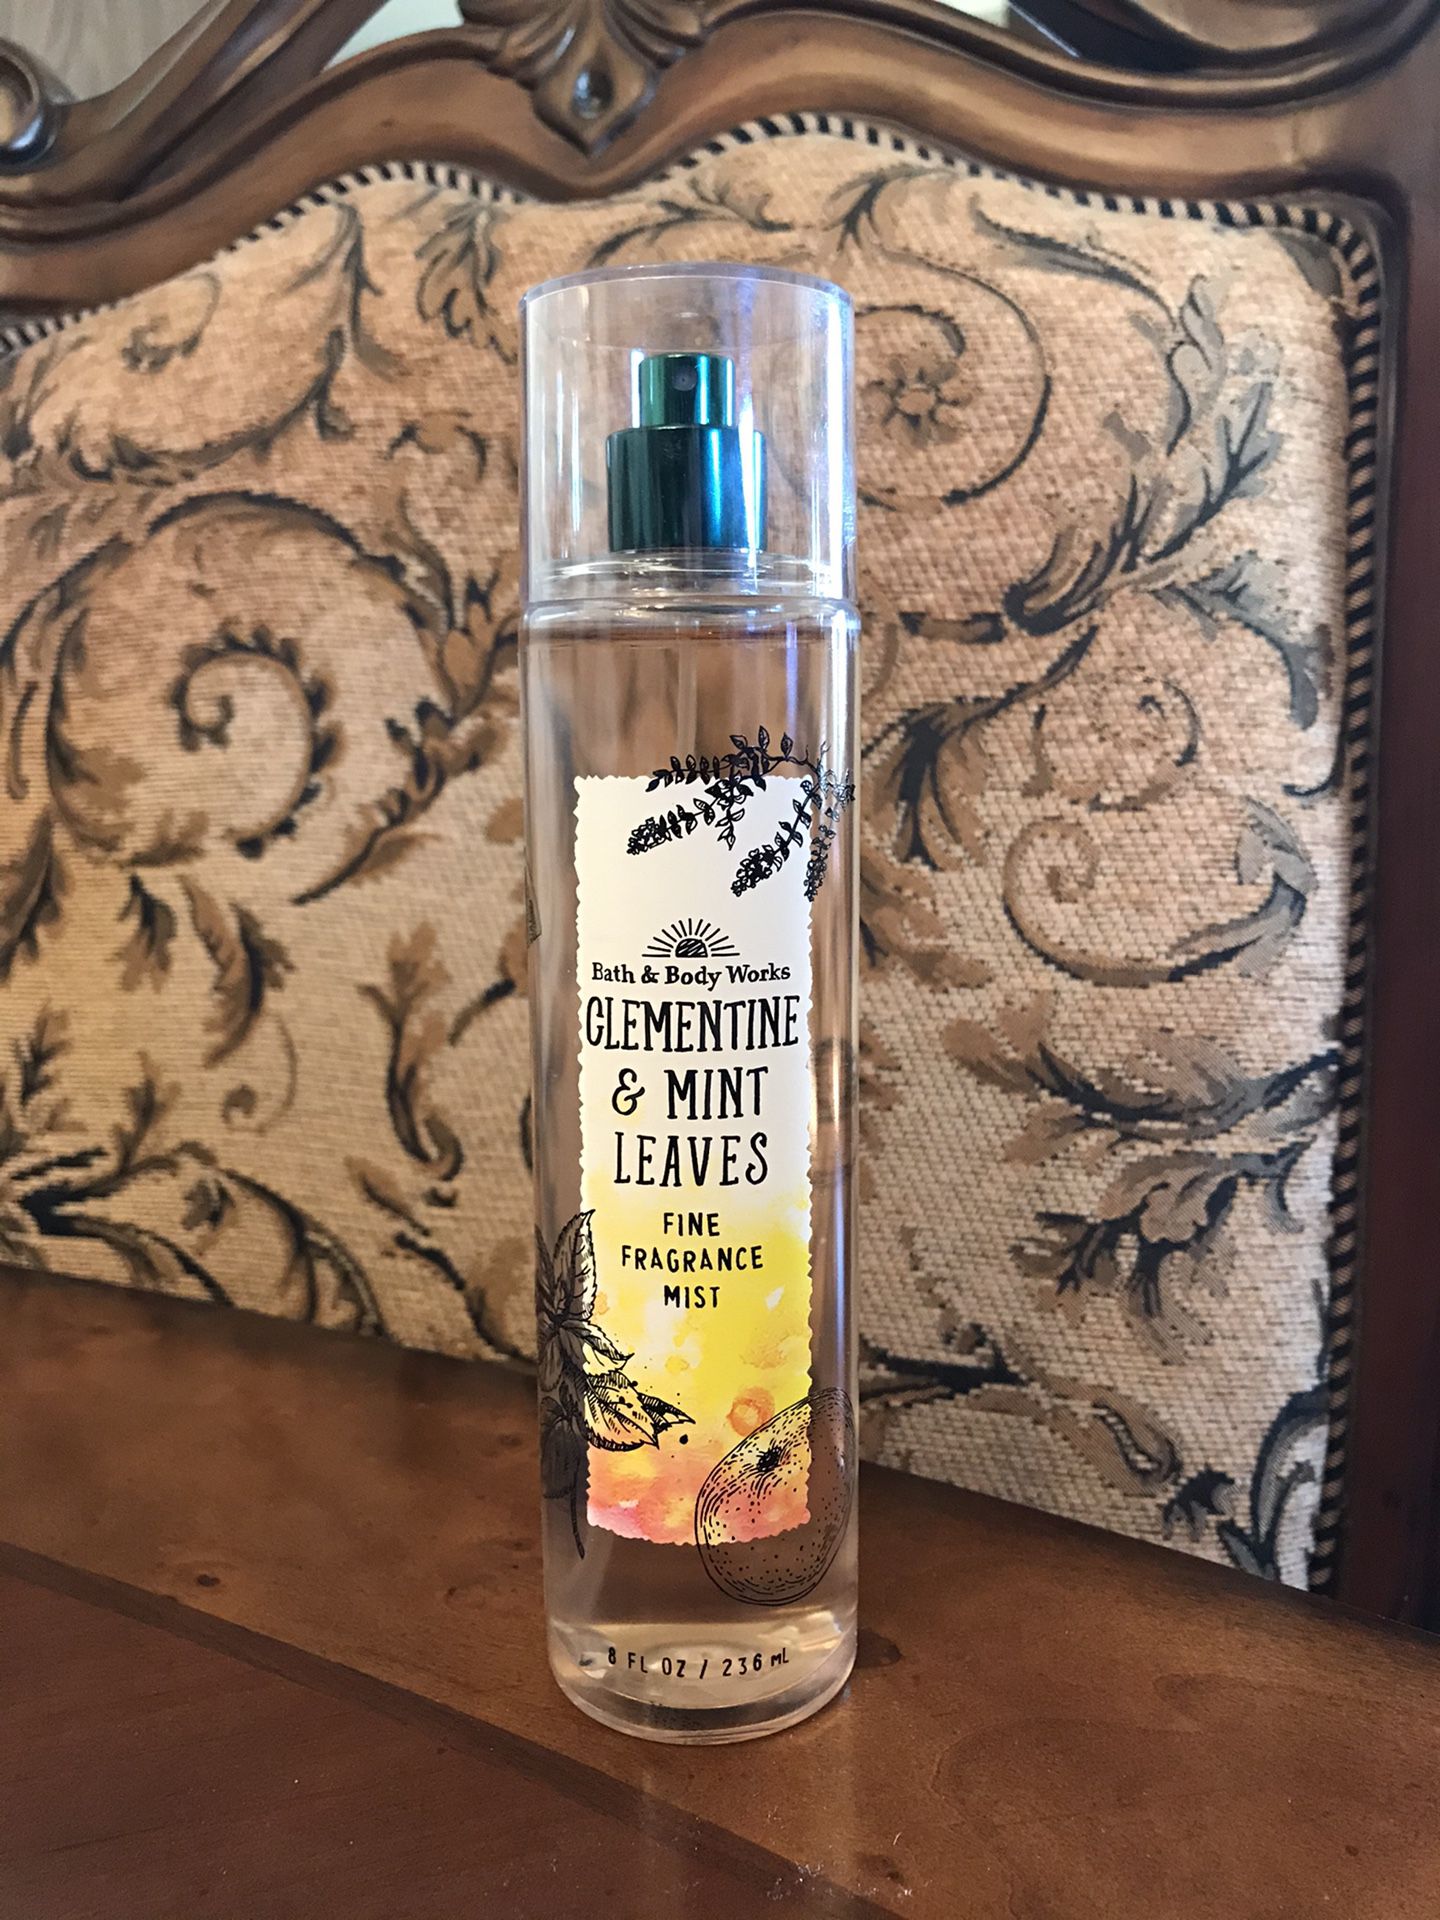 Clementine & Mint Leaves By Bath & Body Works Fragrance Mist